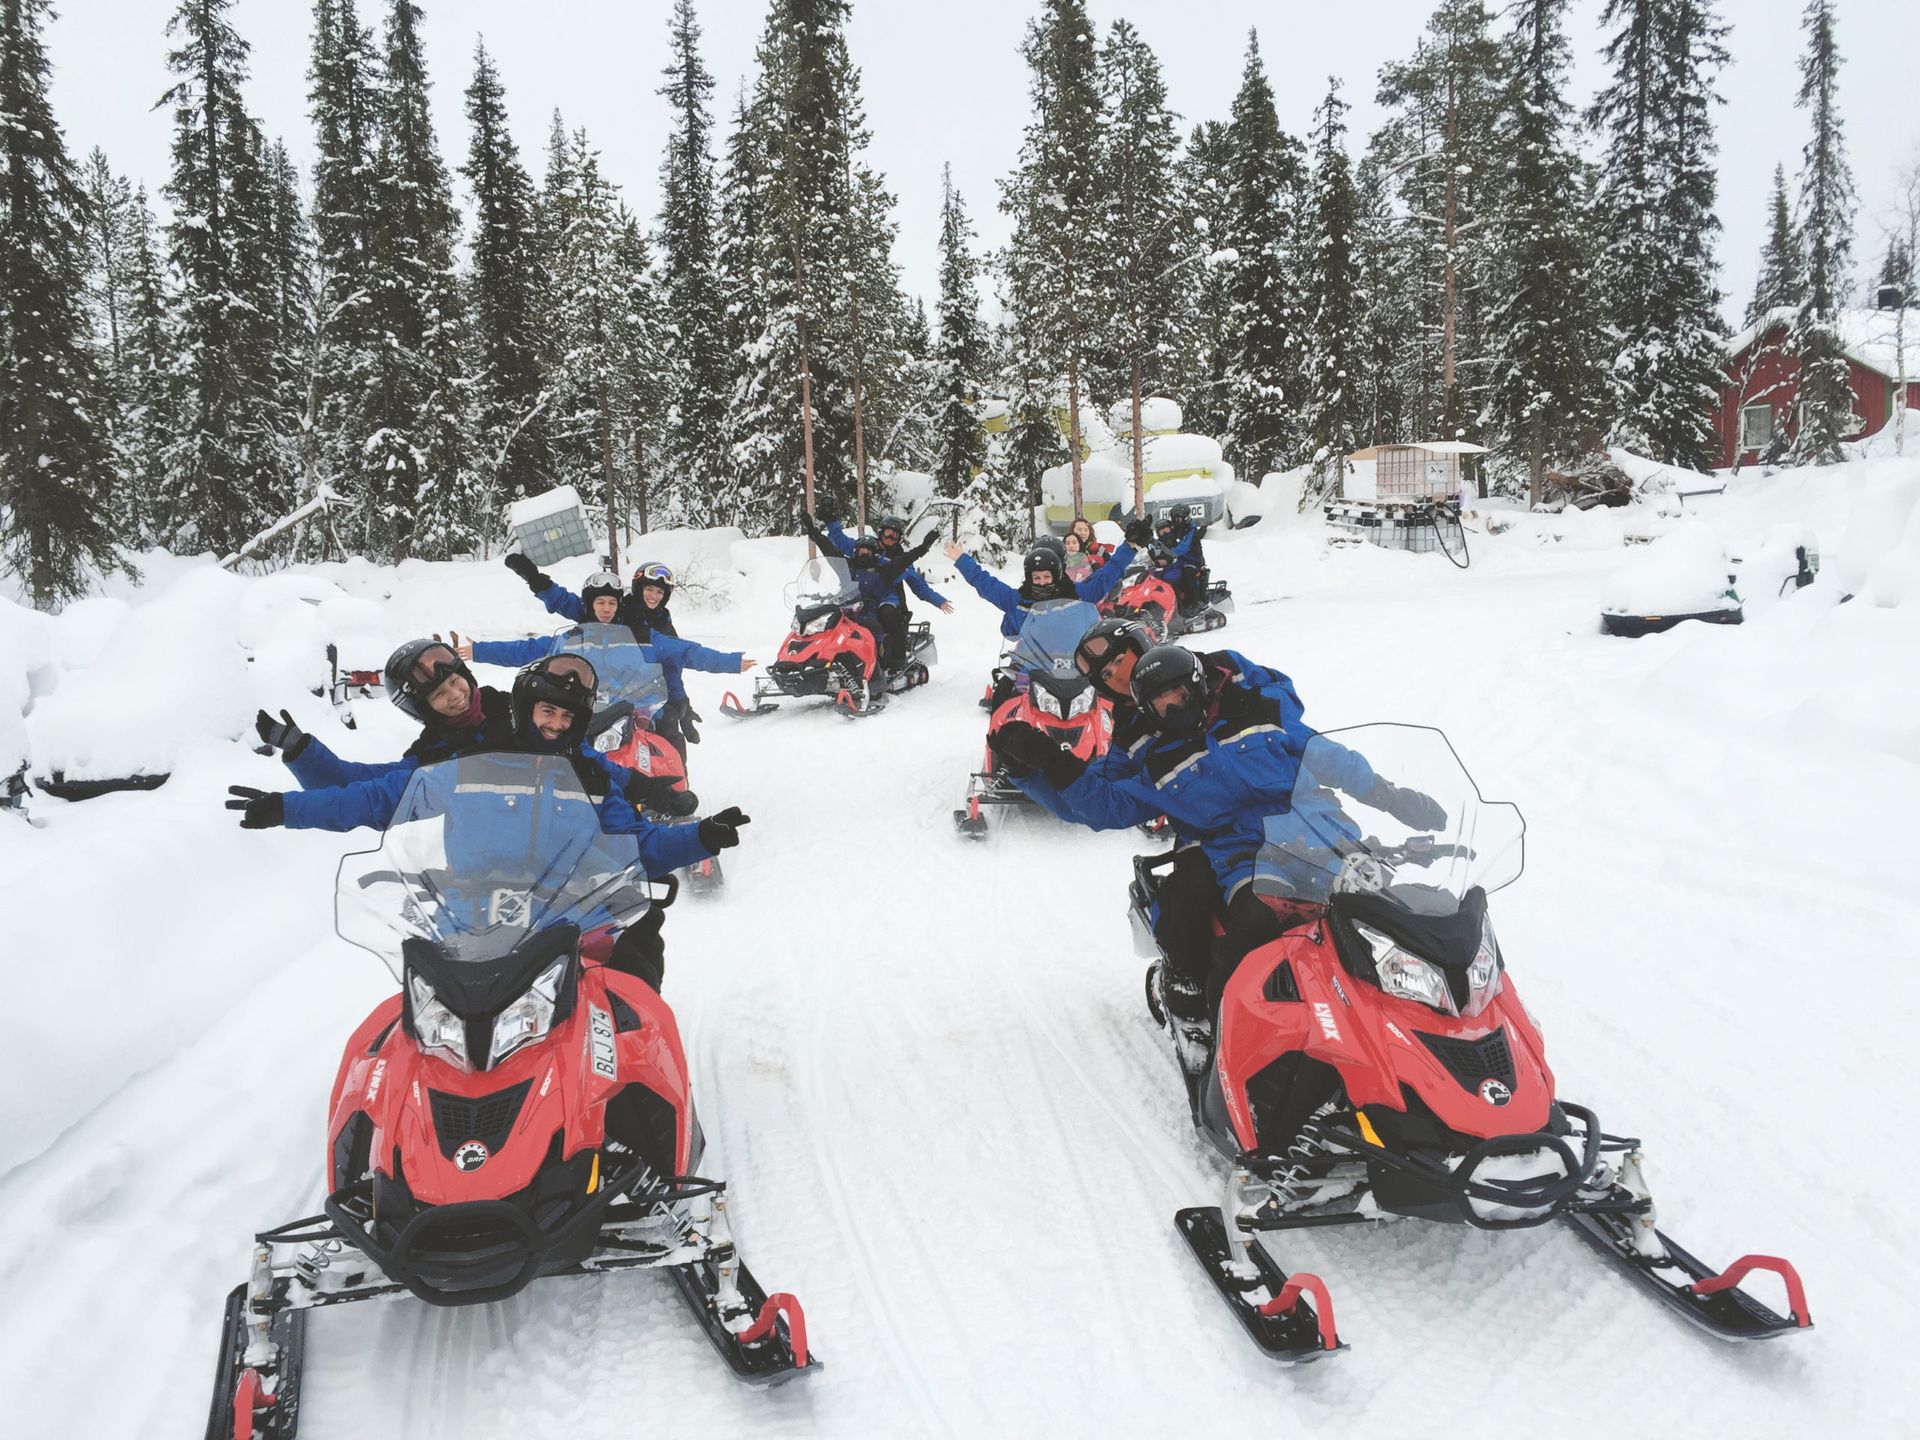 A group of people on snowmobiles, lined up on a snowy trail surrounded by forest.